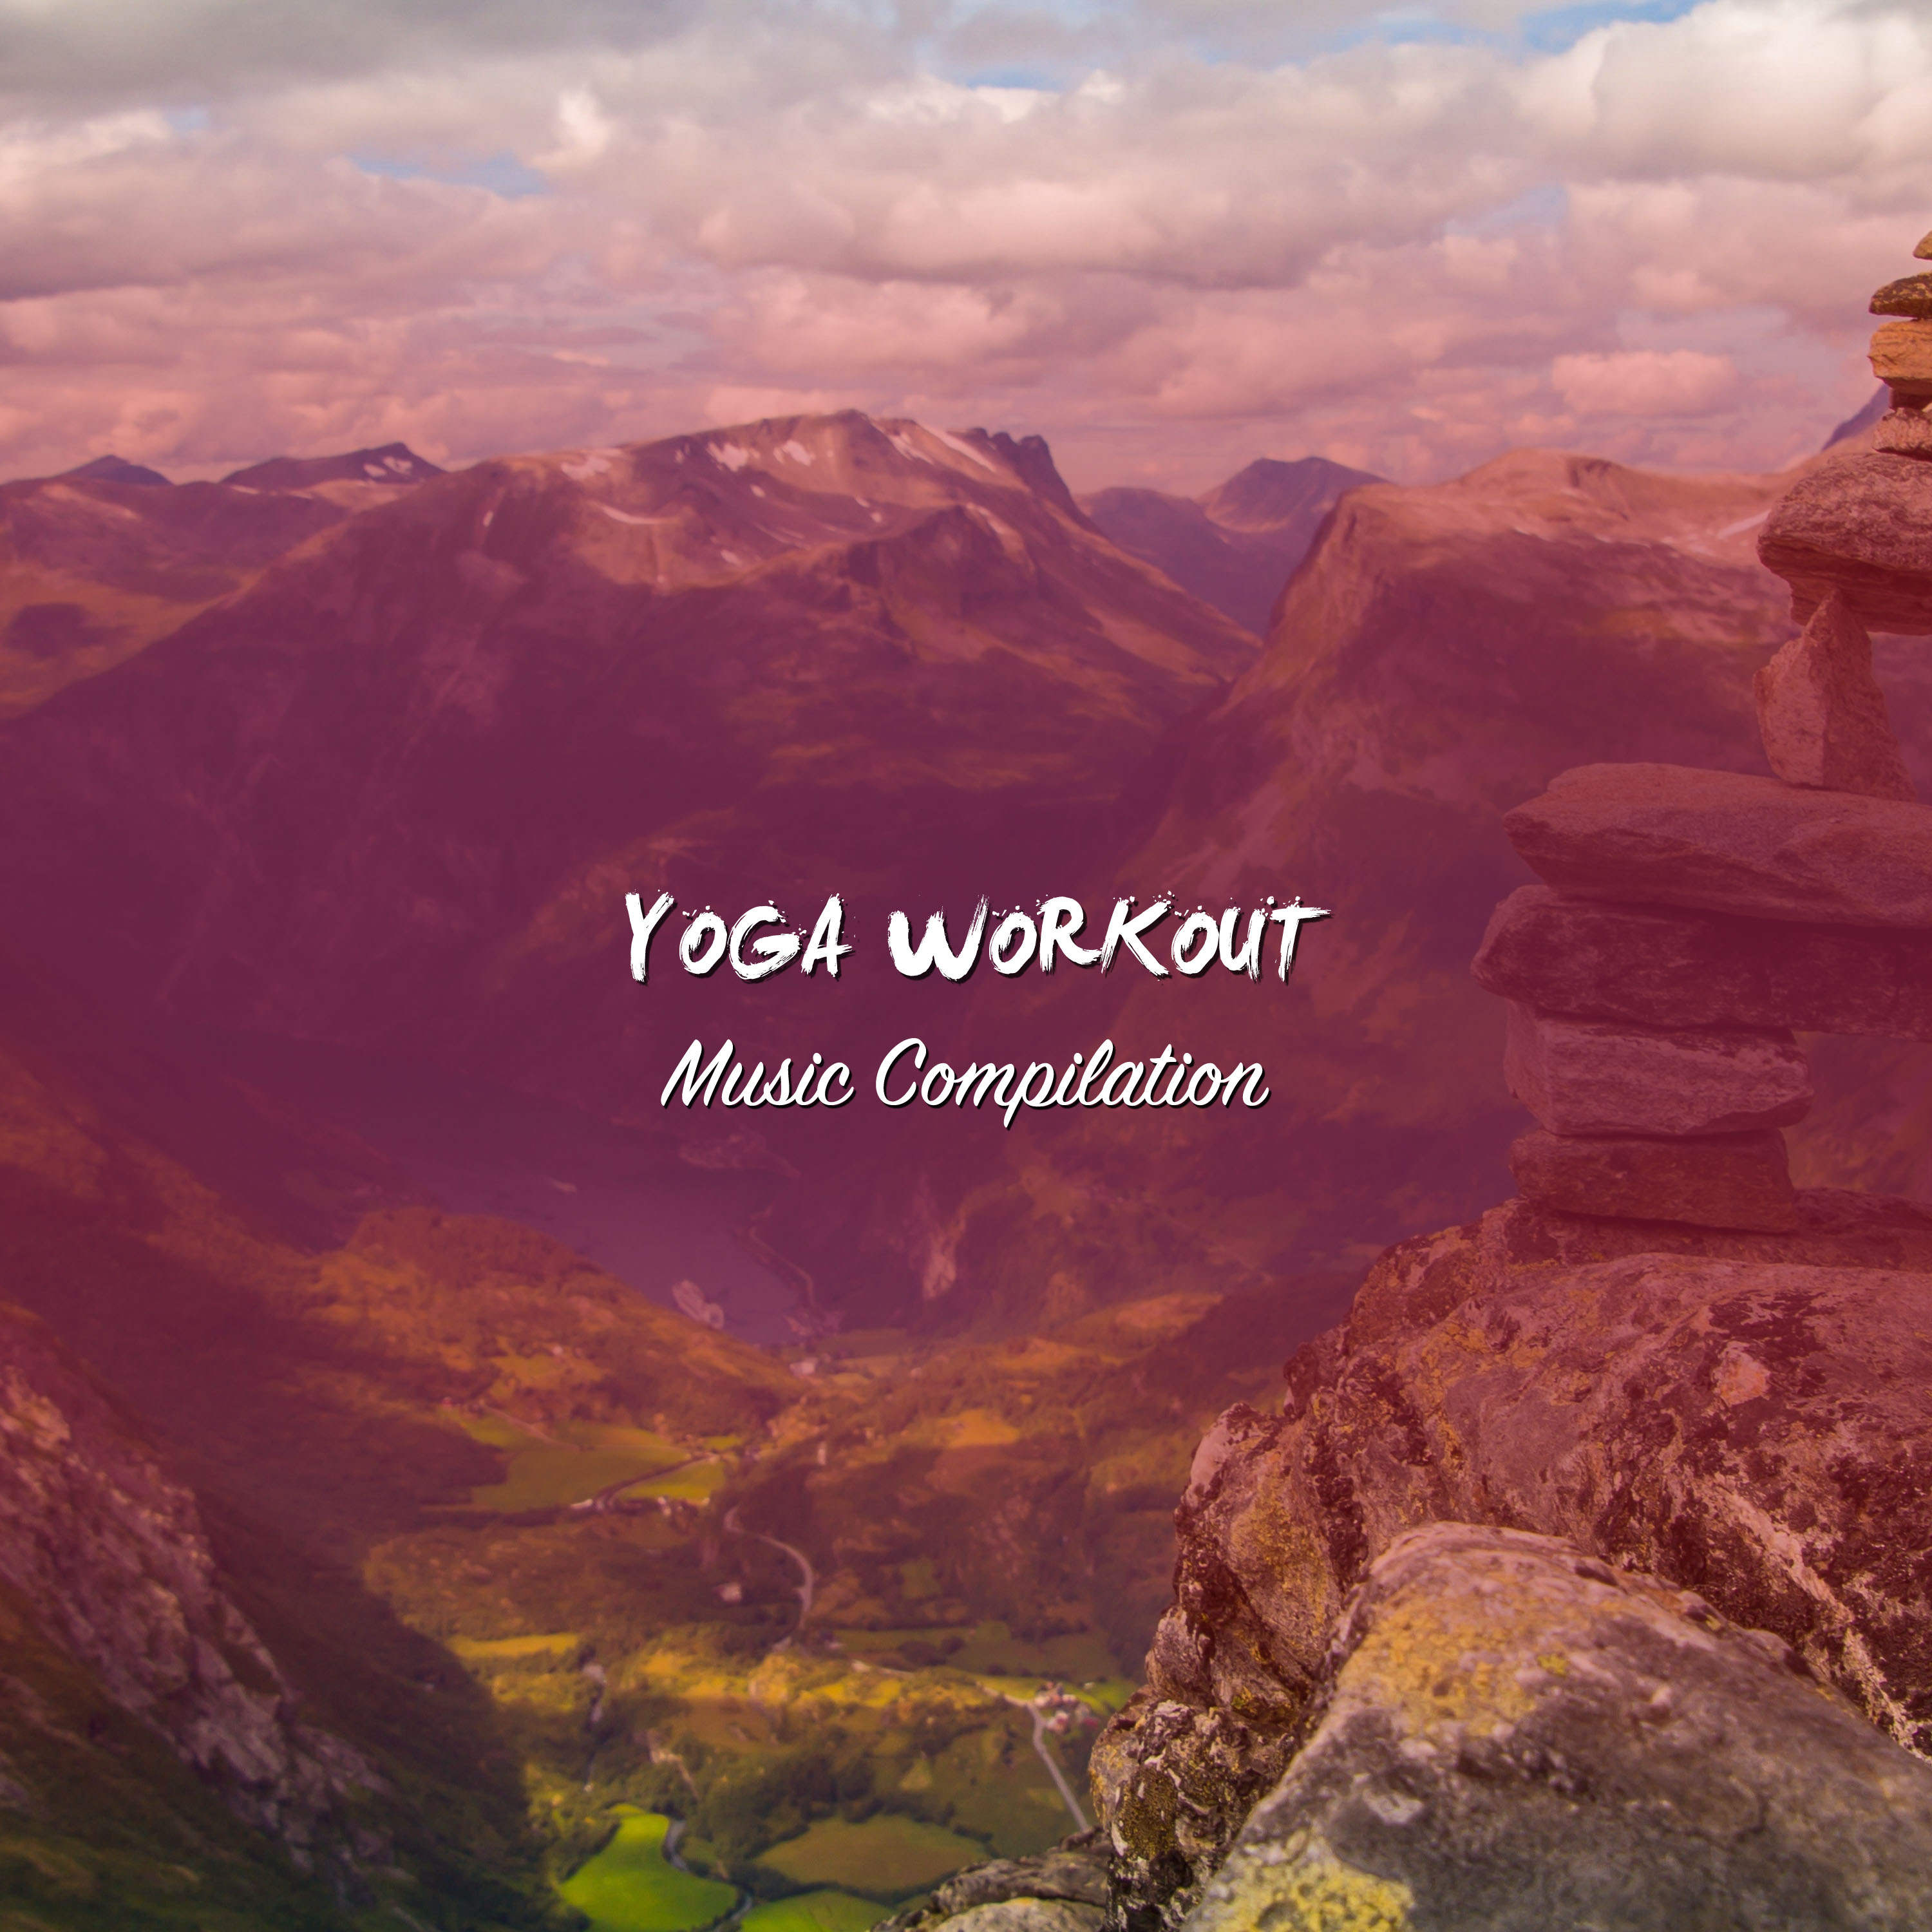 2018 A Yoga Workout Music Compilation